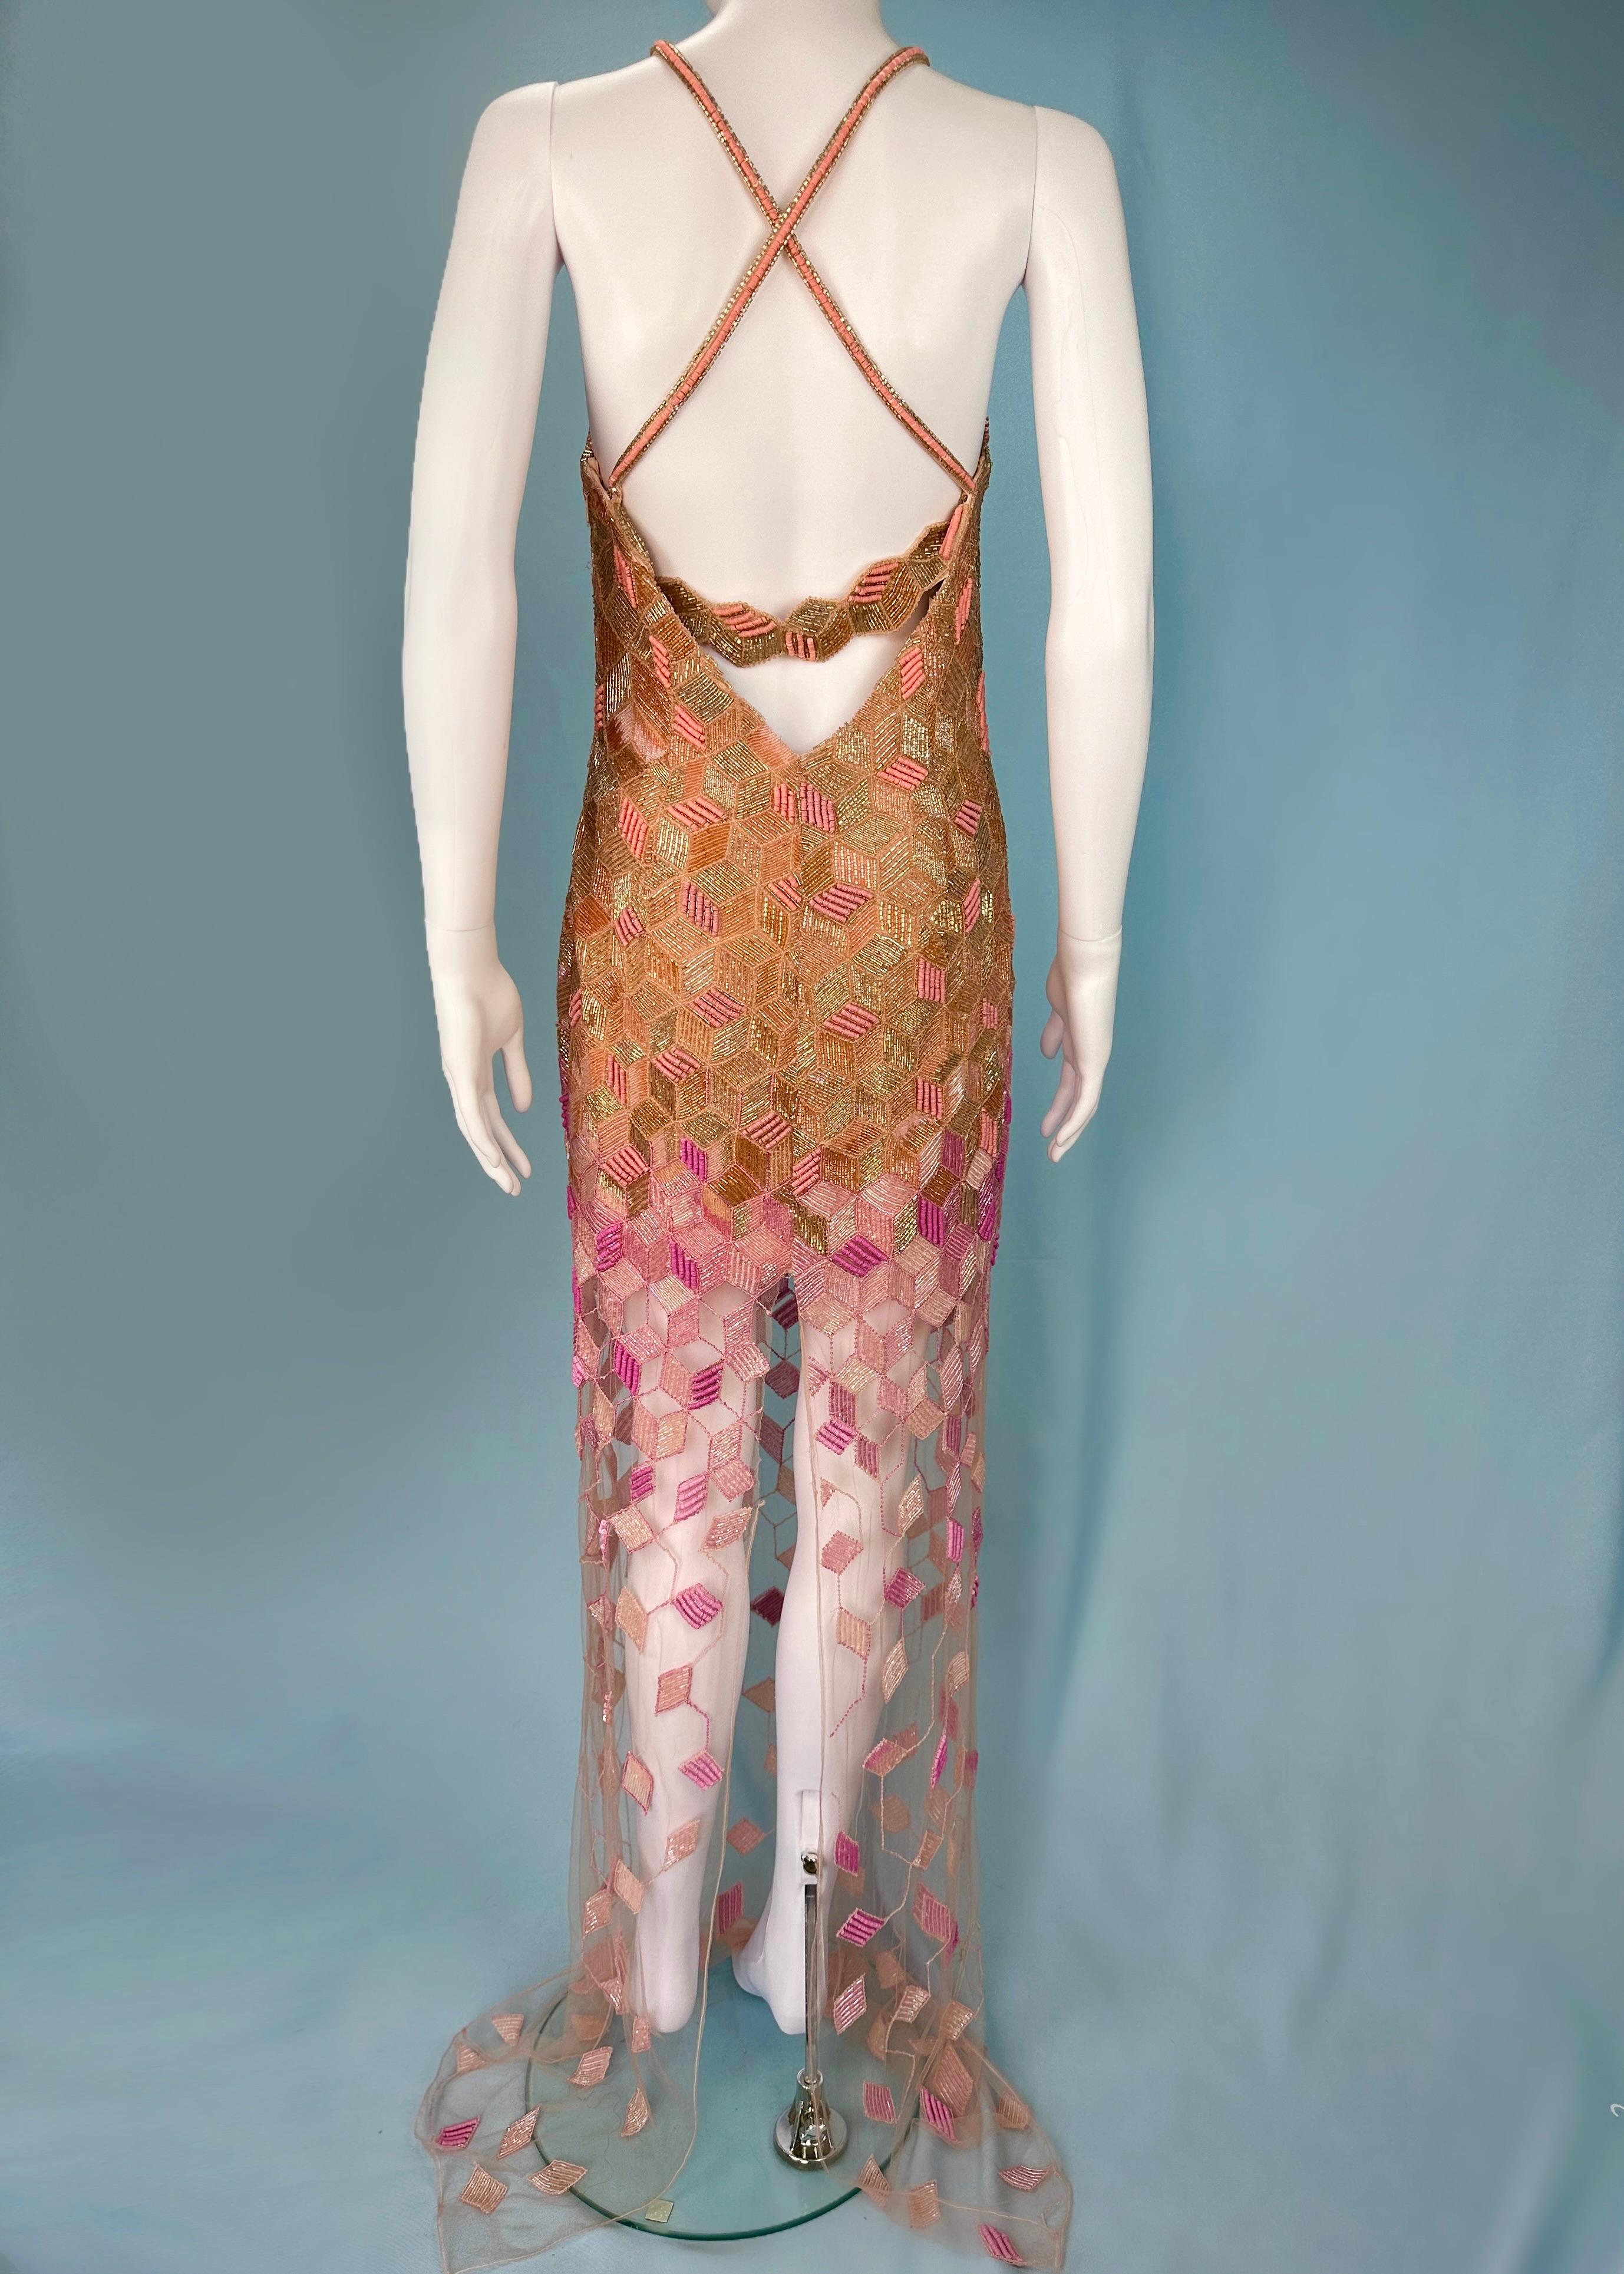 Versace
Spring 2015

Highly embellished full length gown
Geometric cube pattern
Ombre gold to pink
Mesh bust and lower skirt
Open back with embellished strap
Cross back straps
Plunge bust
Concealed zip up side

Size IT 42 / UK 10 / US